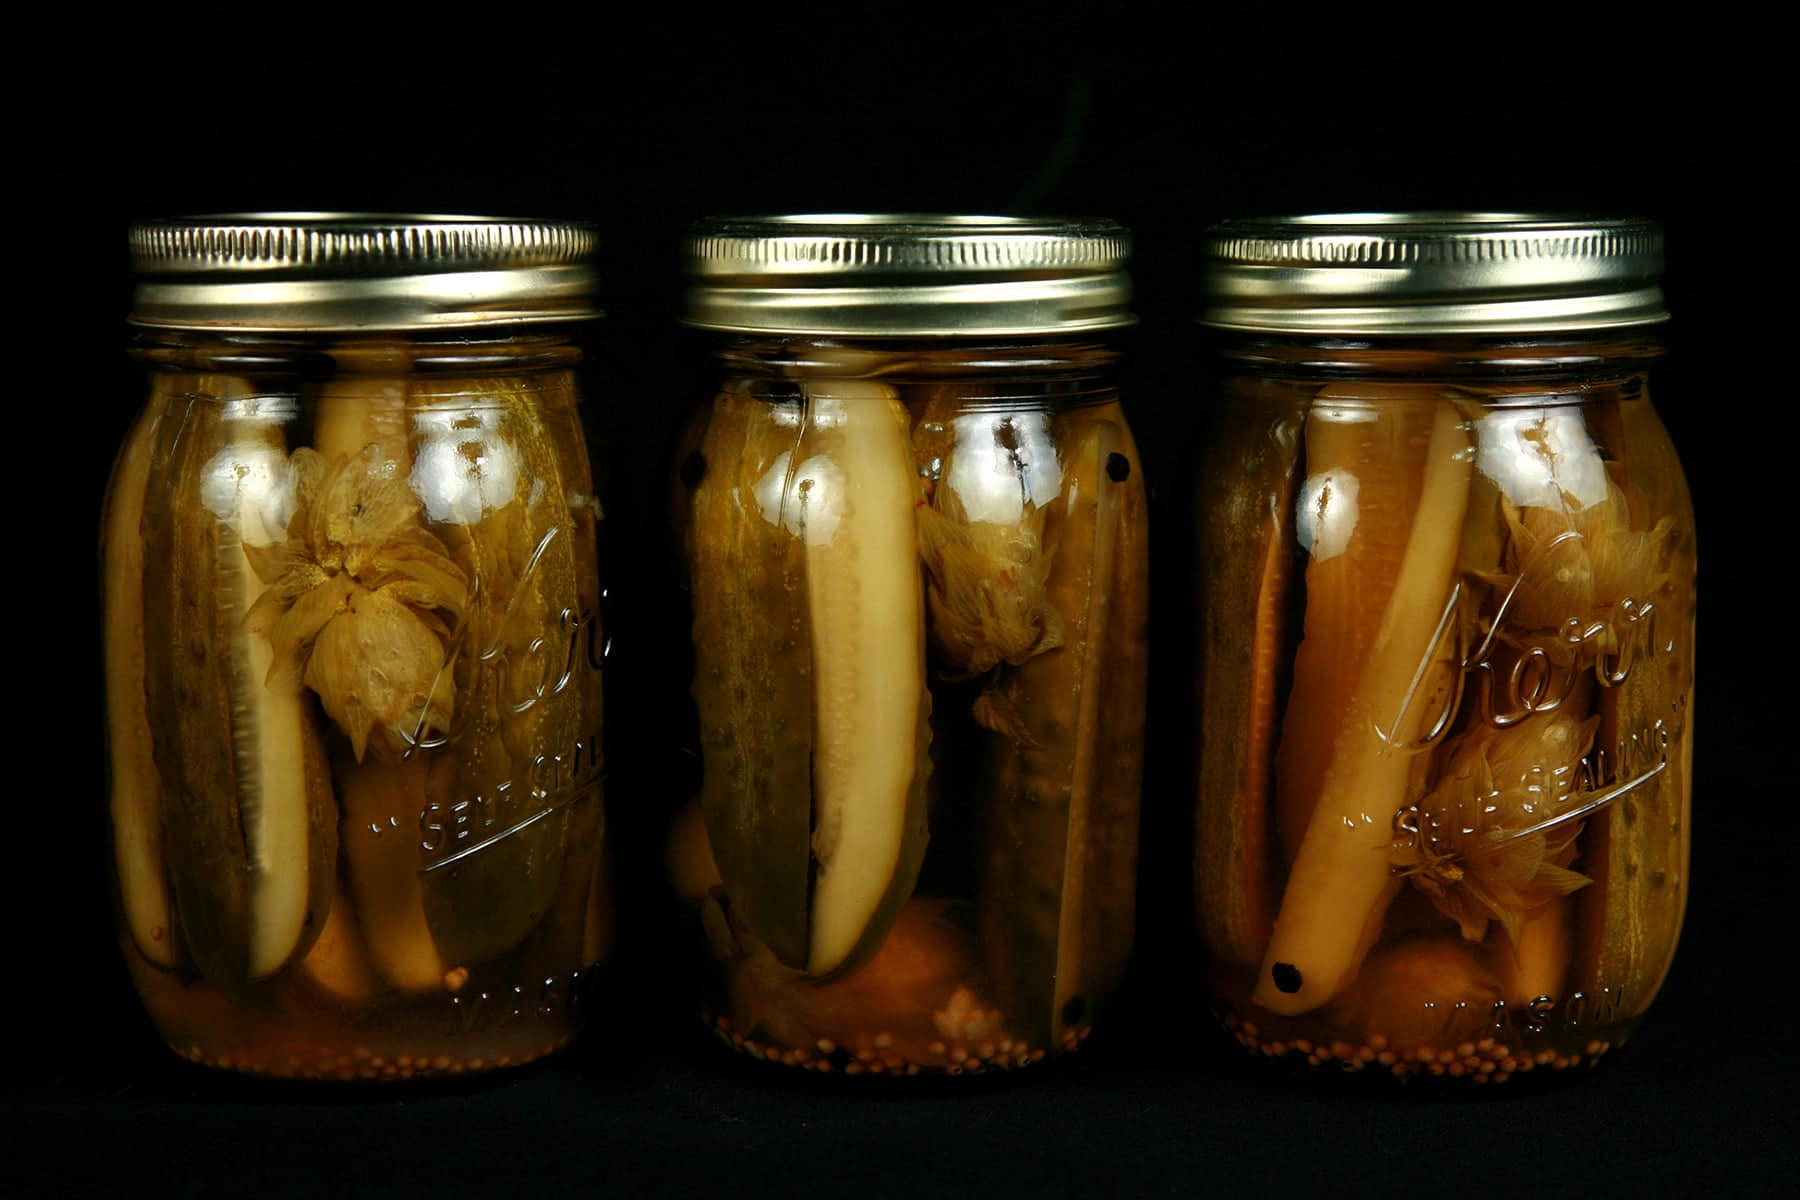 3 jars of hoppy IPA pickles in a row, Hop flowers are visible in the jars, which are against a black background.